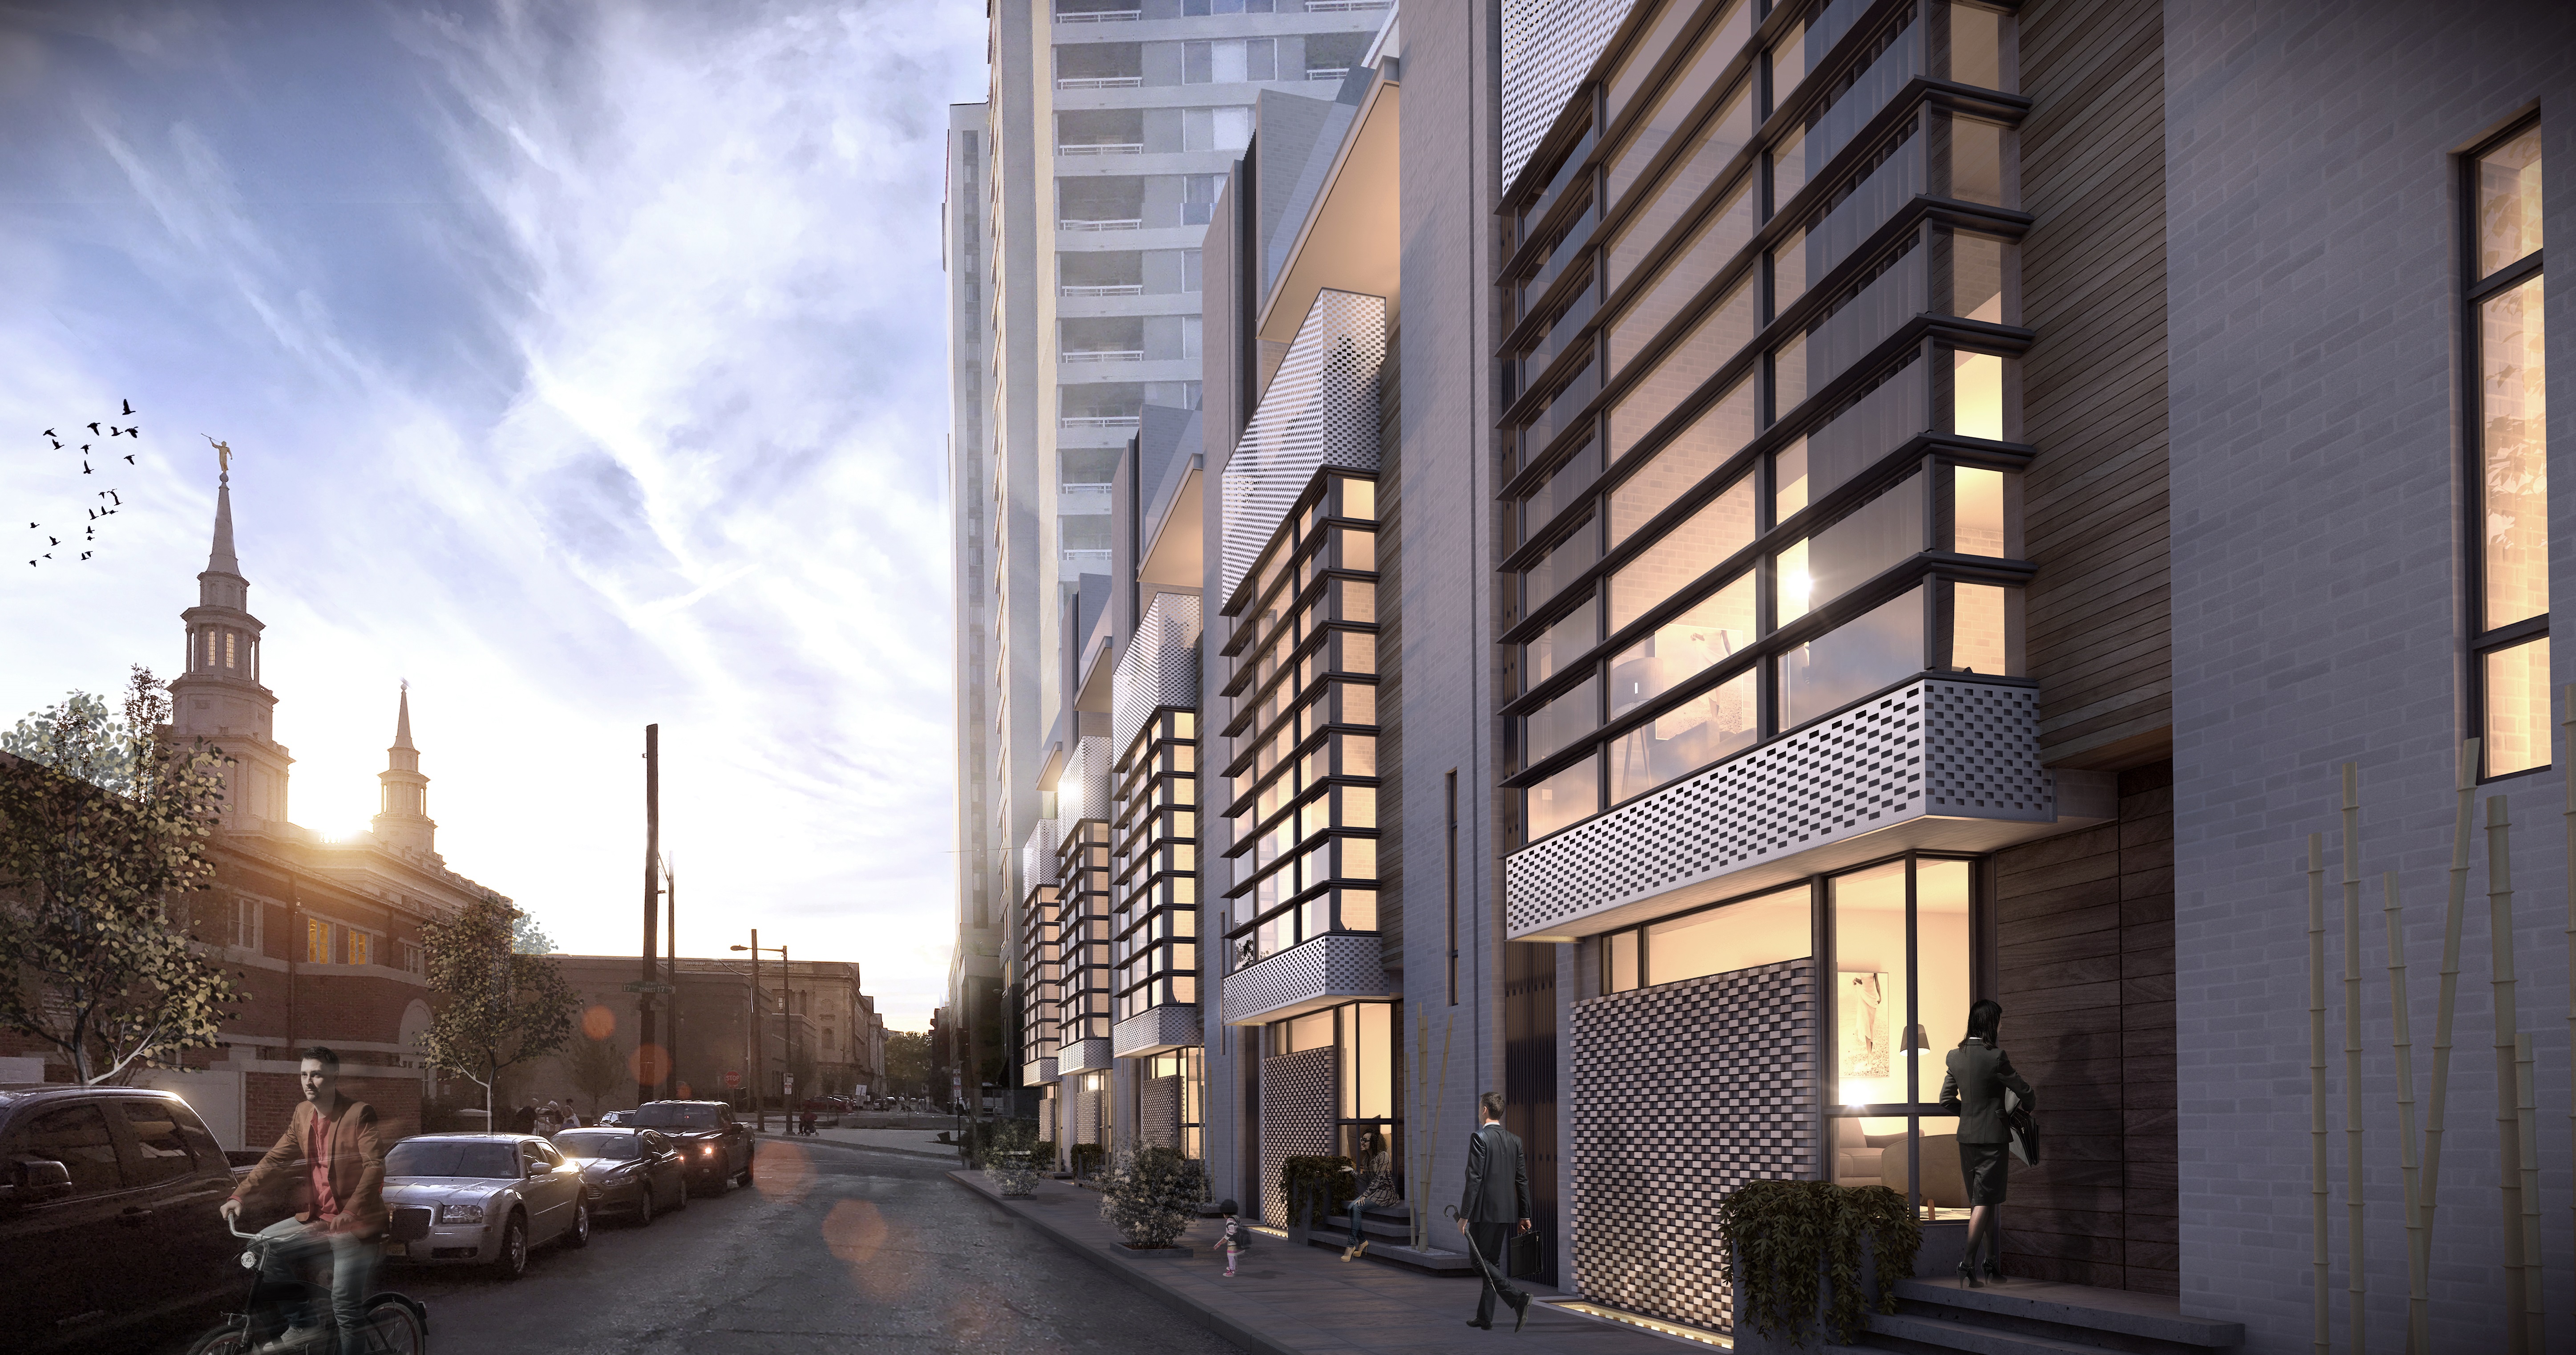 A rendering of a series of contemporary townhomes lit up at night.